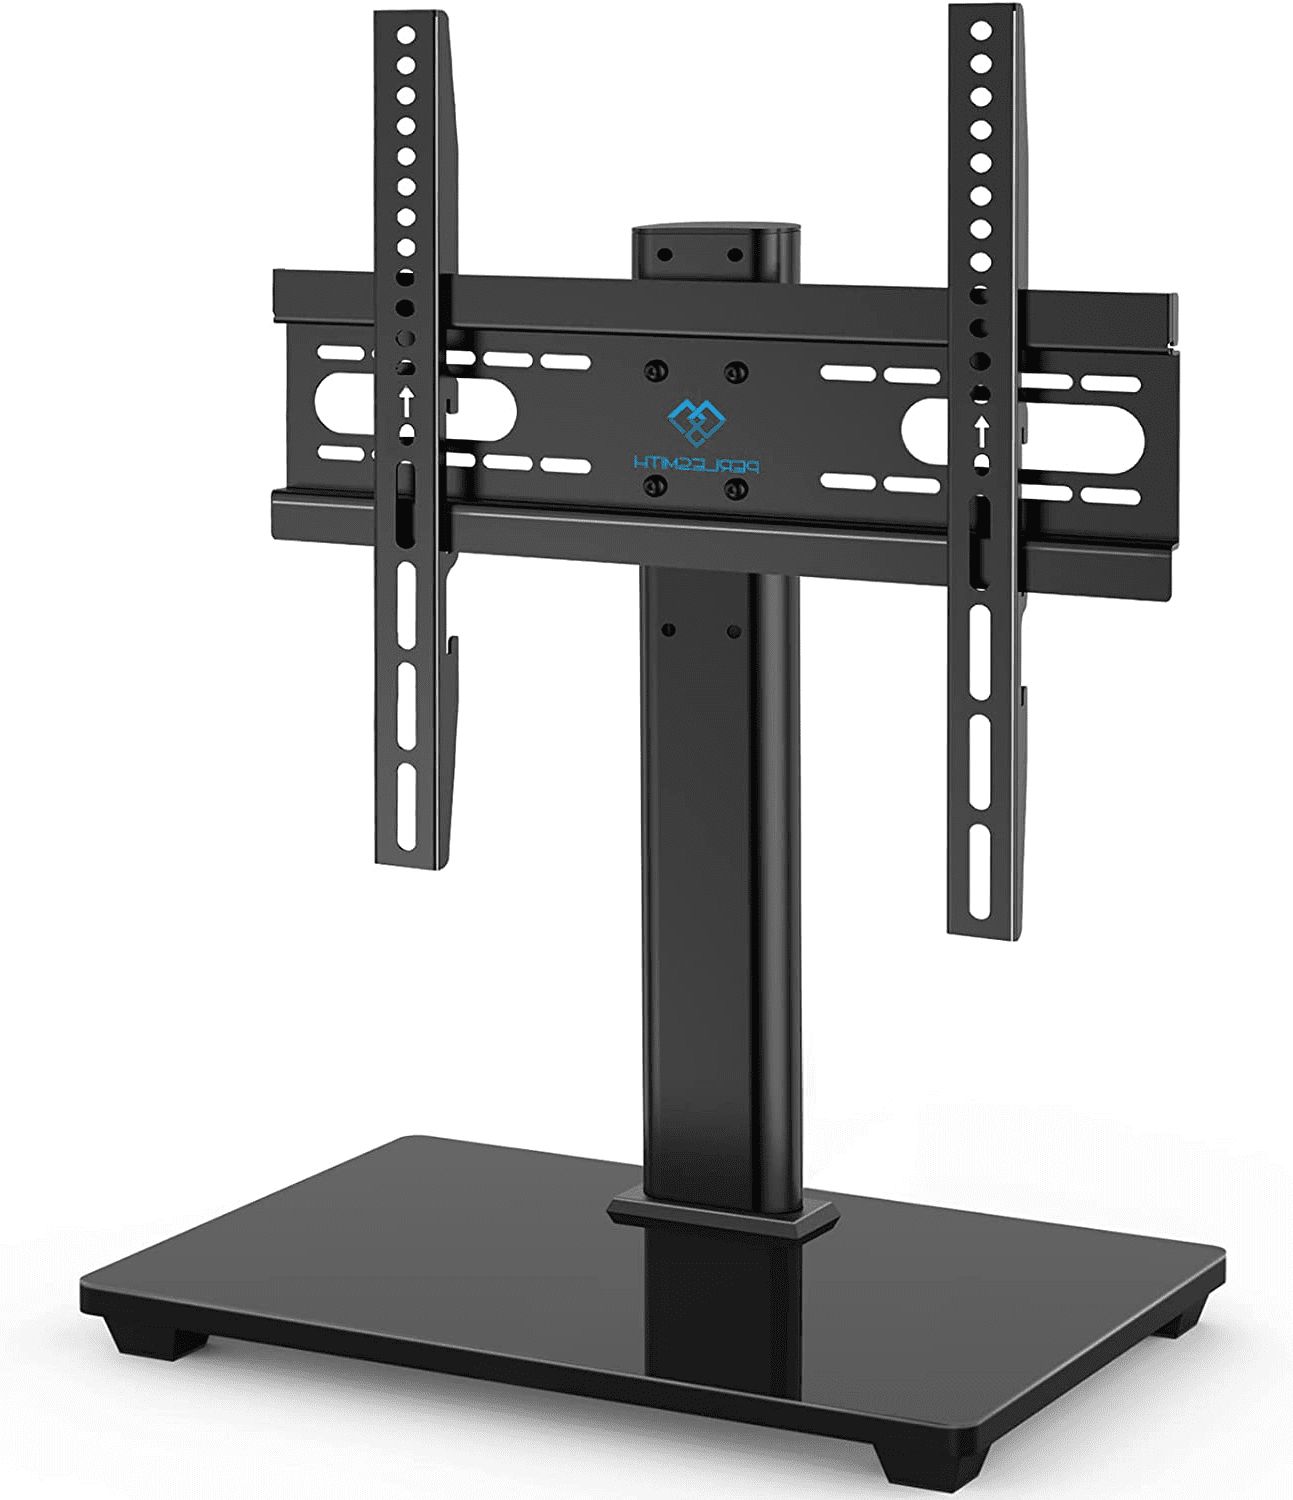 Universal Tabletop Tv Stand Base With Mount,for India | Ubuy Regarding Universal Tabletop Tv Stands (View 6 of 20)